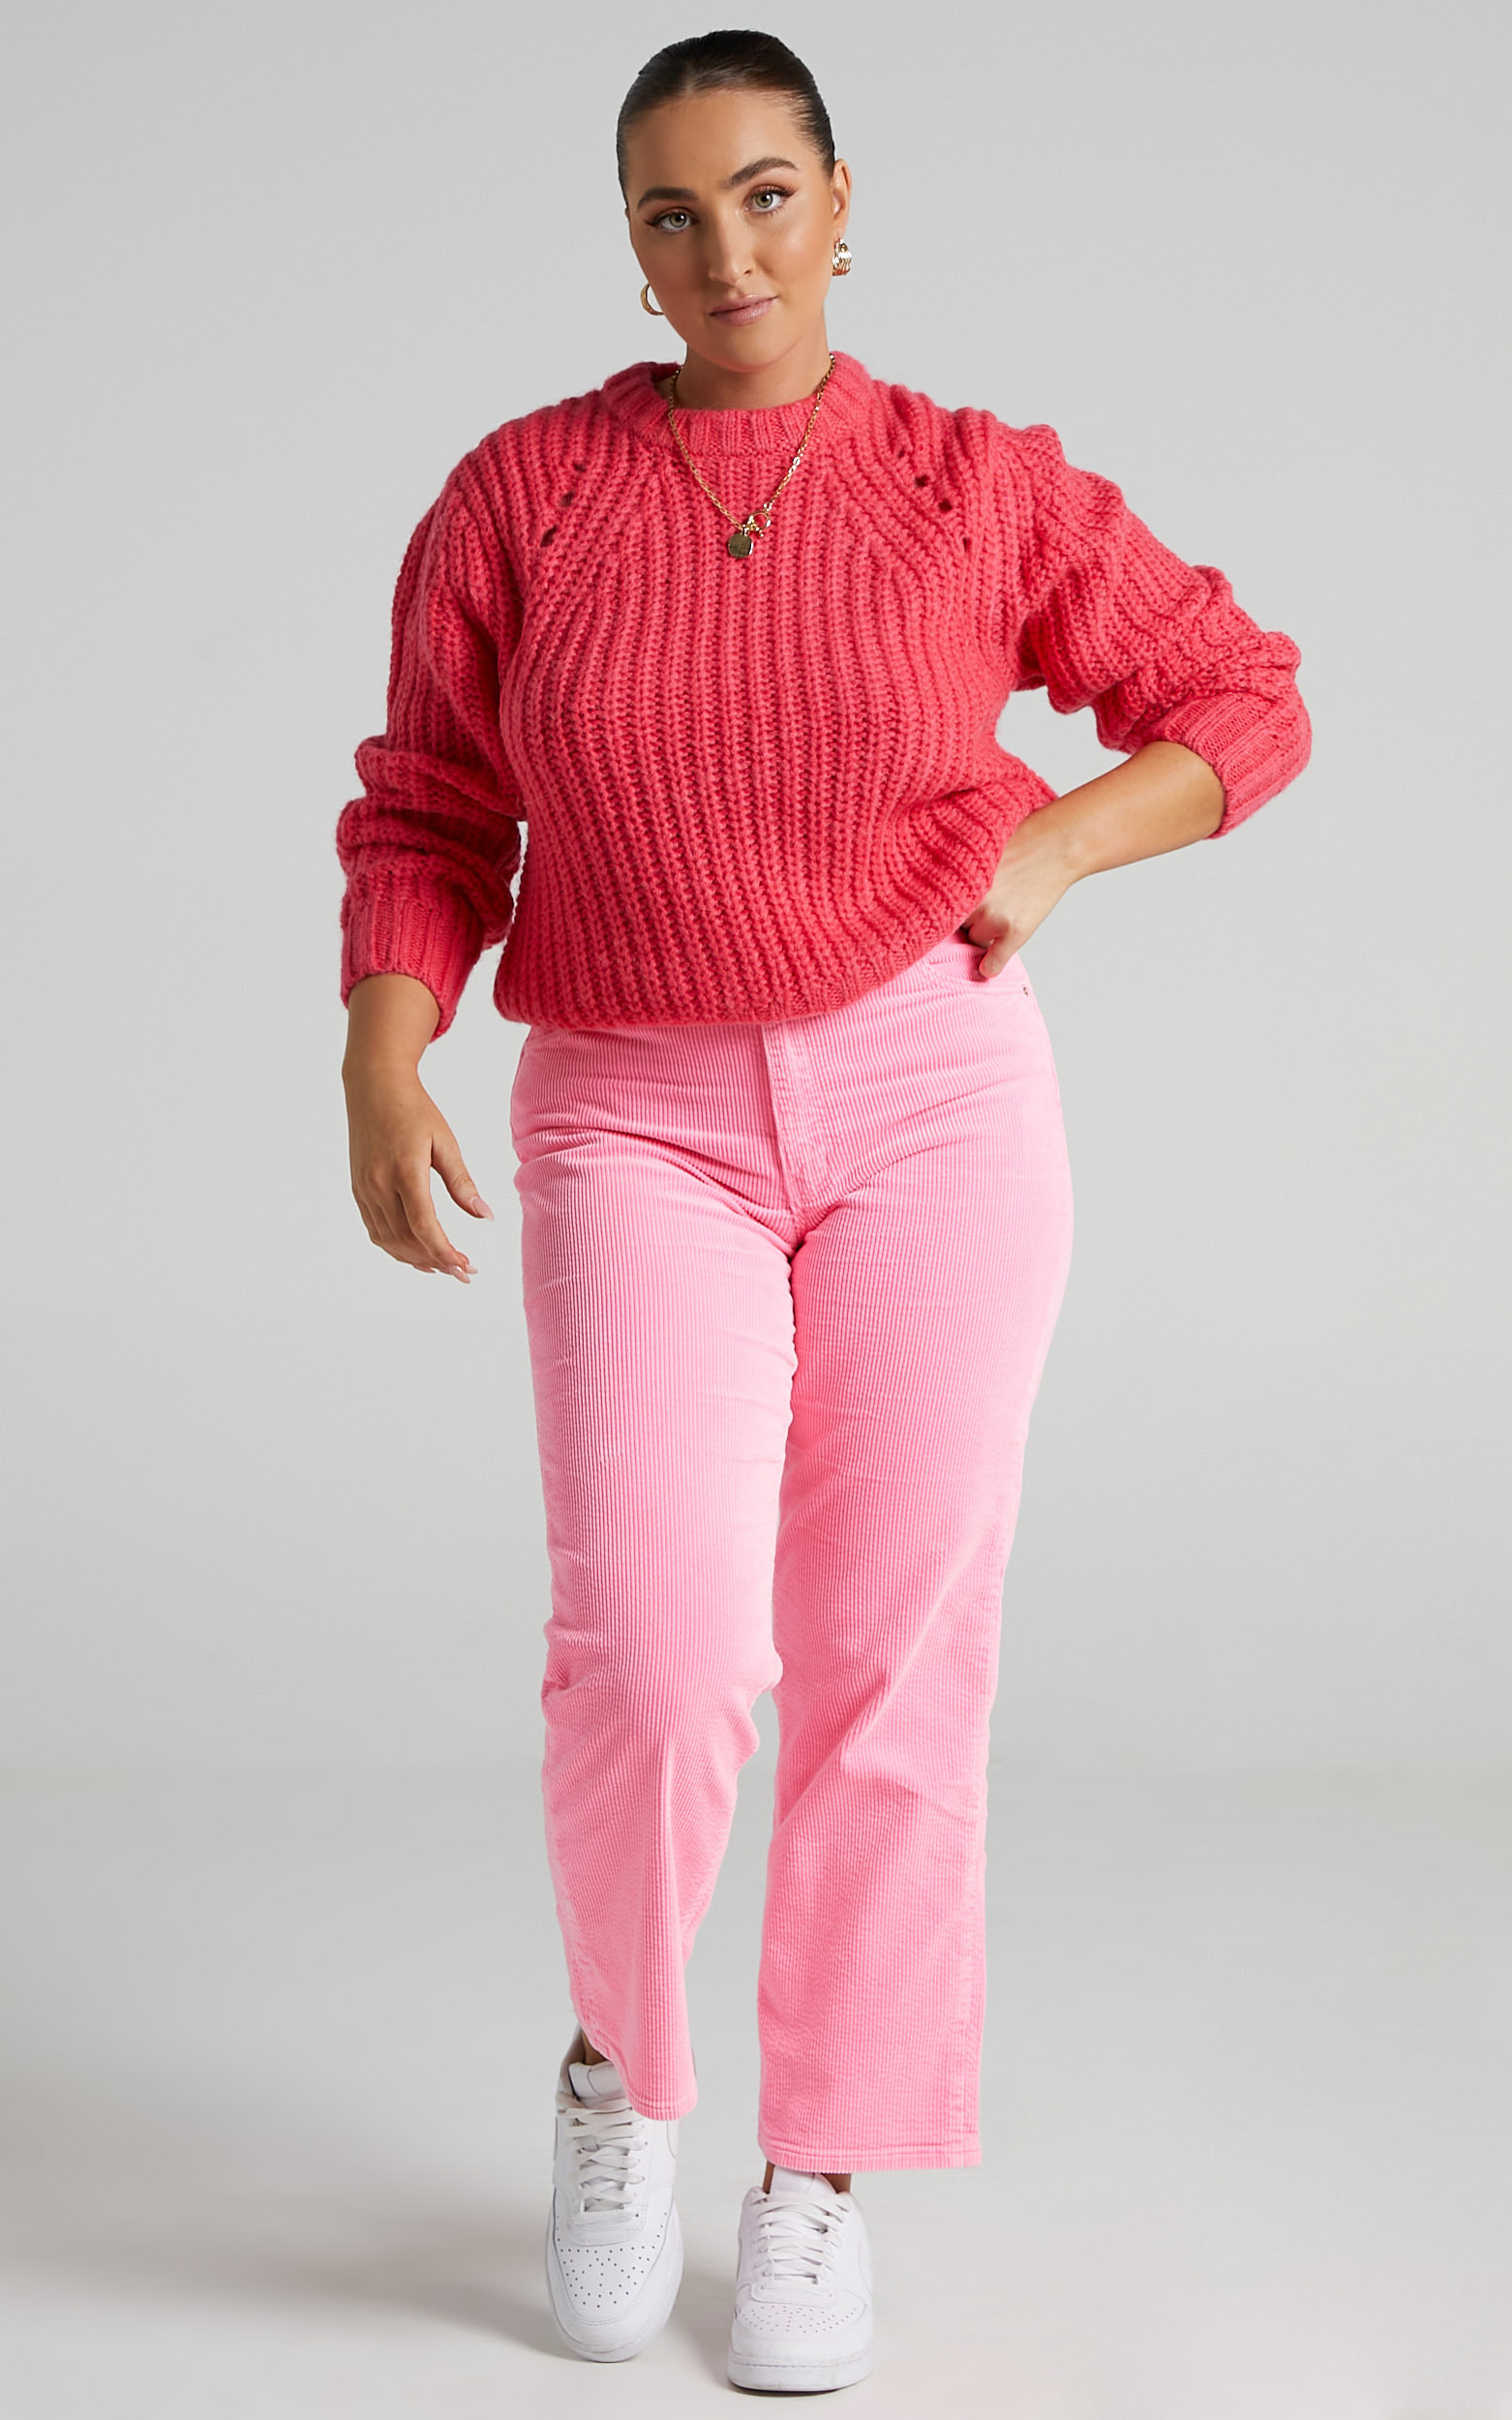 Rolla's - Captain Sweater in Pink Cordial - 06, PNK1, hi-res image number null